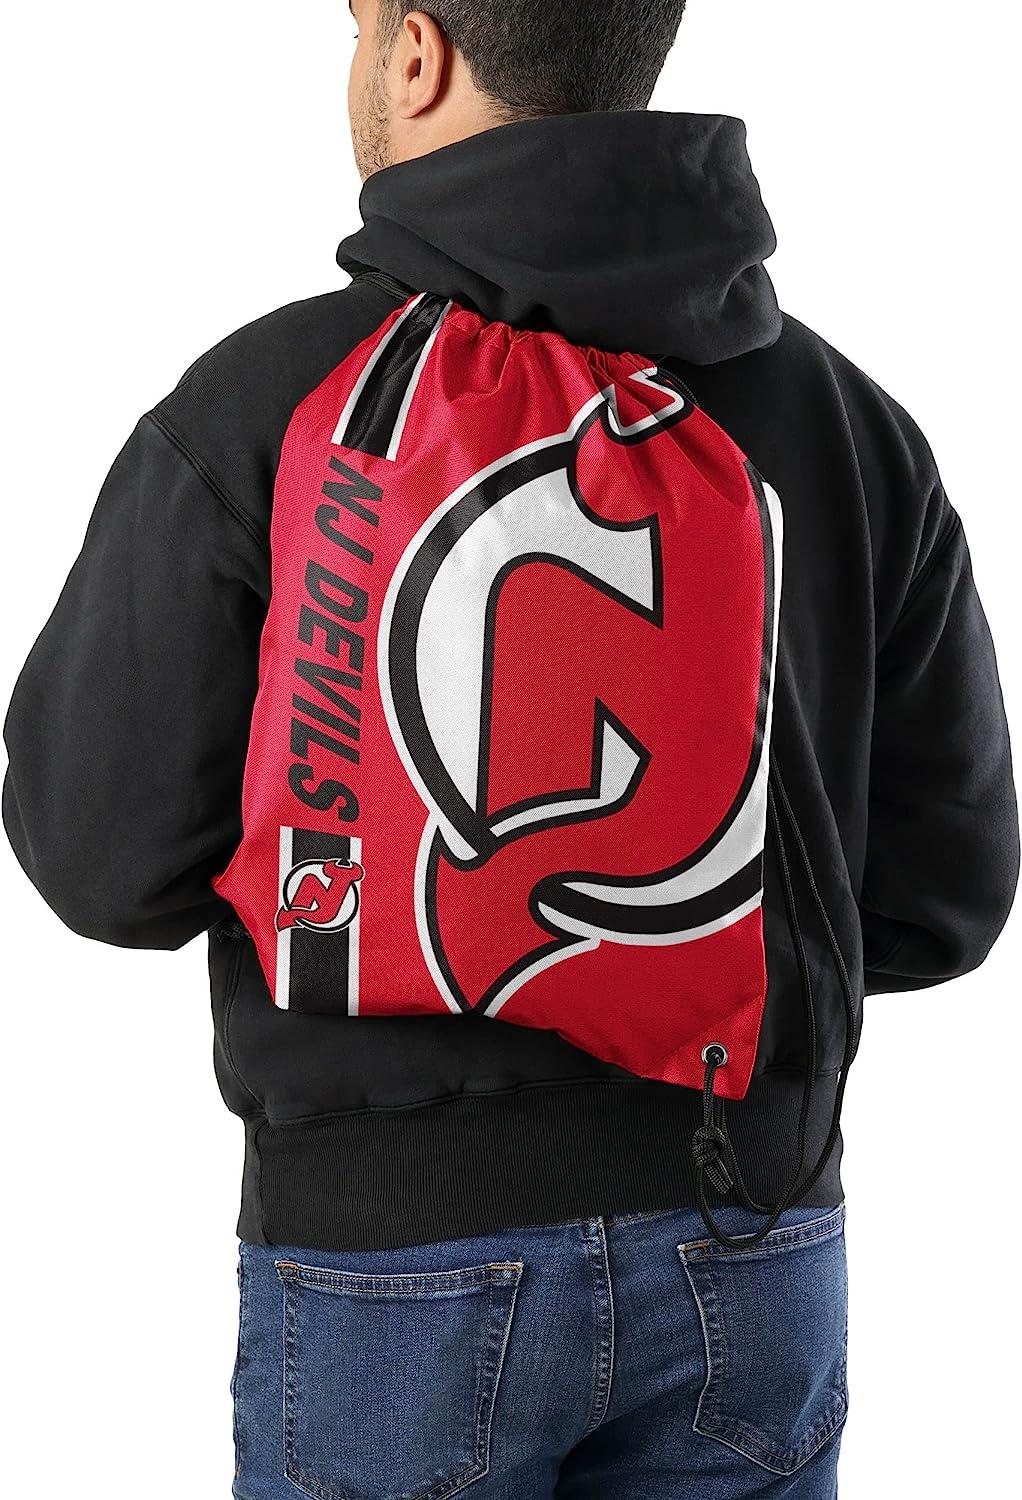 Best Selling Product] Customize Vintage NHL New Jersey Devils